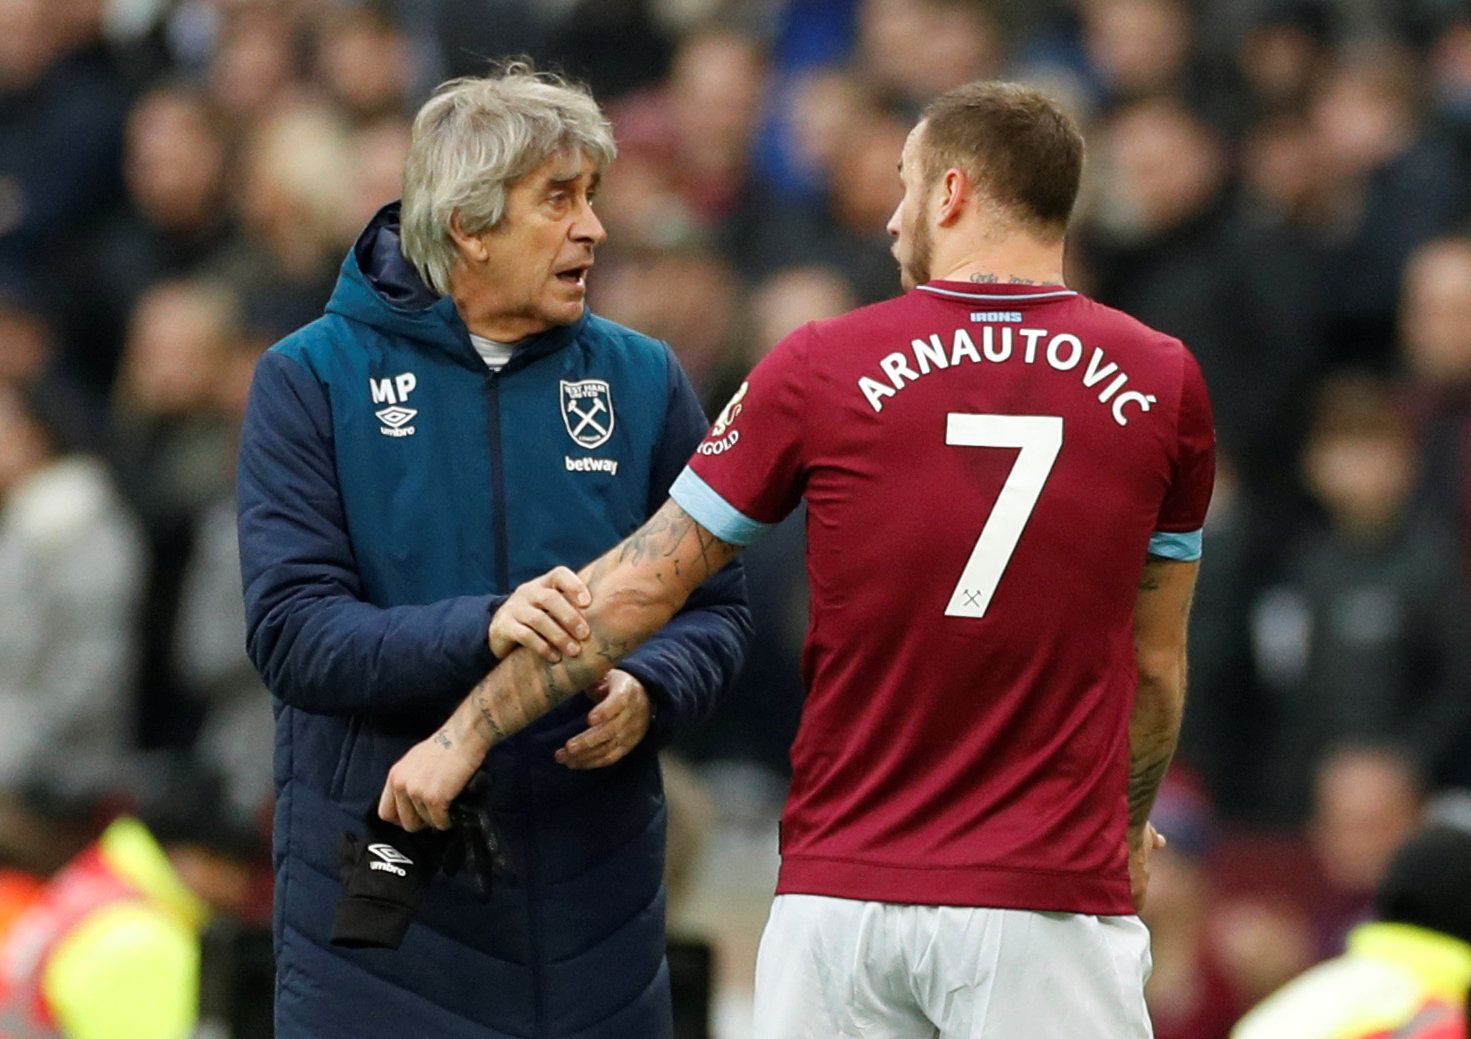 Soccer Football - FA Cup Third Round - West Ham United v Birmingham City - London Stadium, London, Britain - January 5, 2019  West Ham's Marko Arnautovic reacts as he is substituted off while West Ham manager Manuel Pellegrini looks on           Action Images via Reuters/John Sibley